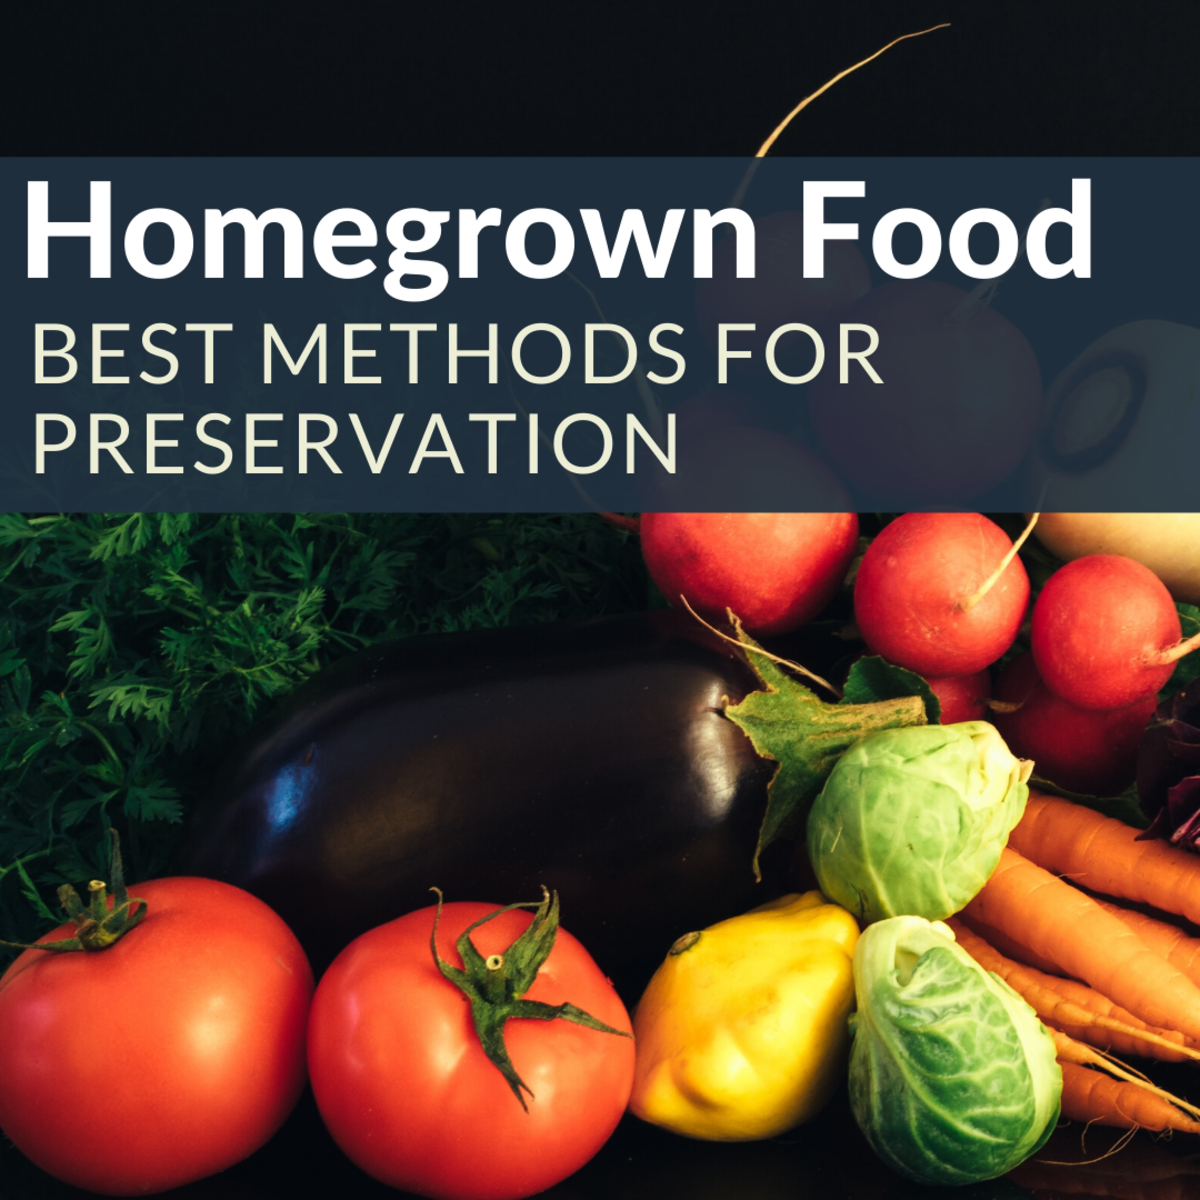 Let's explore the most common food preservation methods!